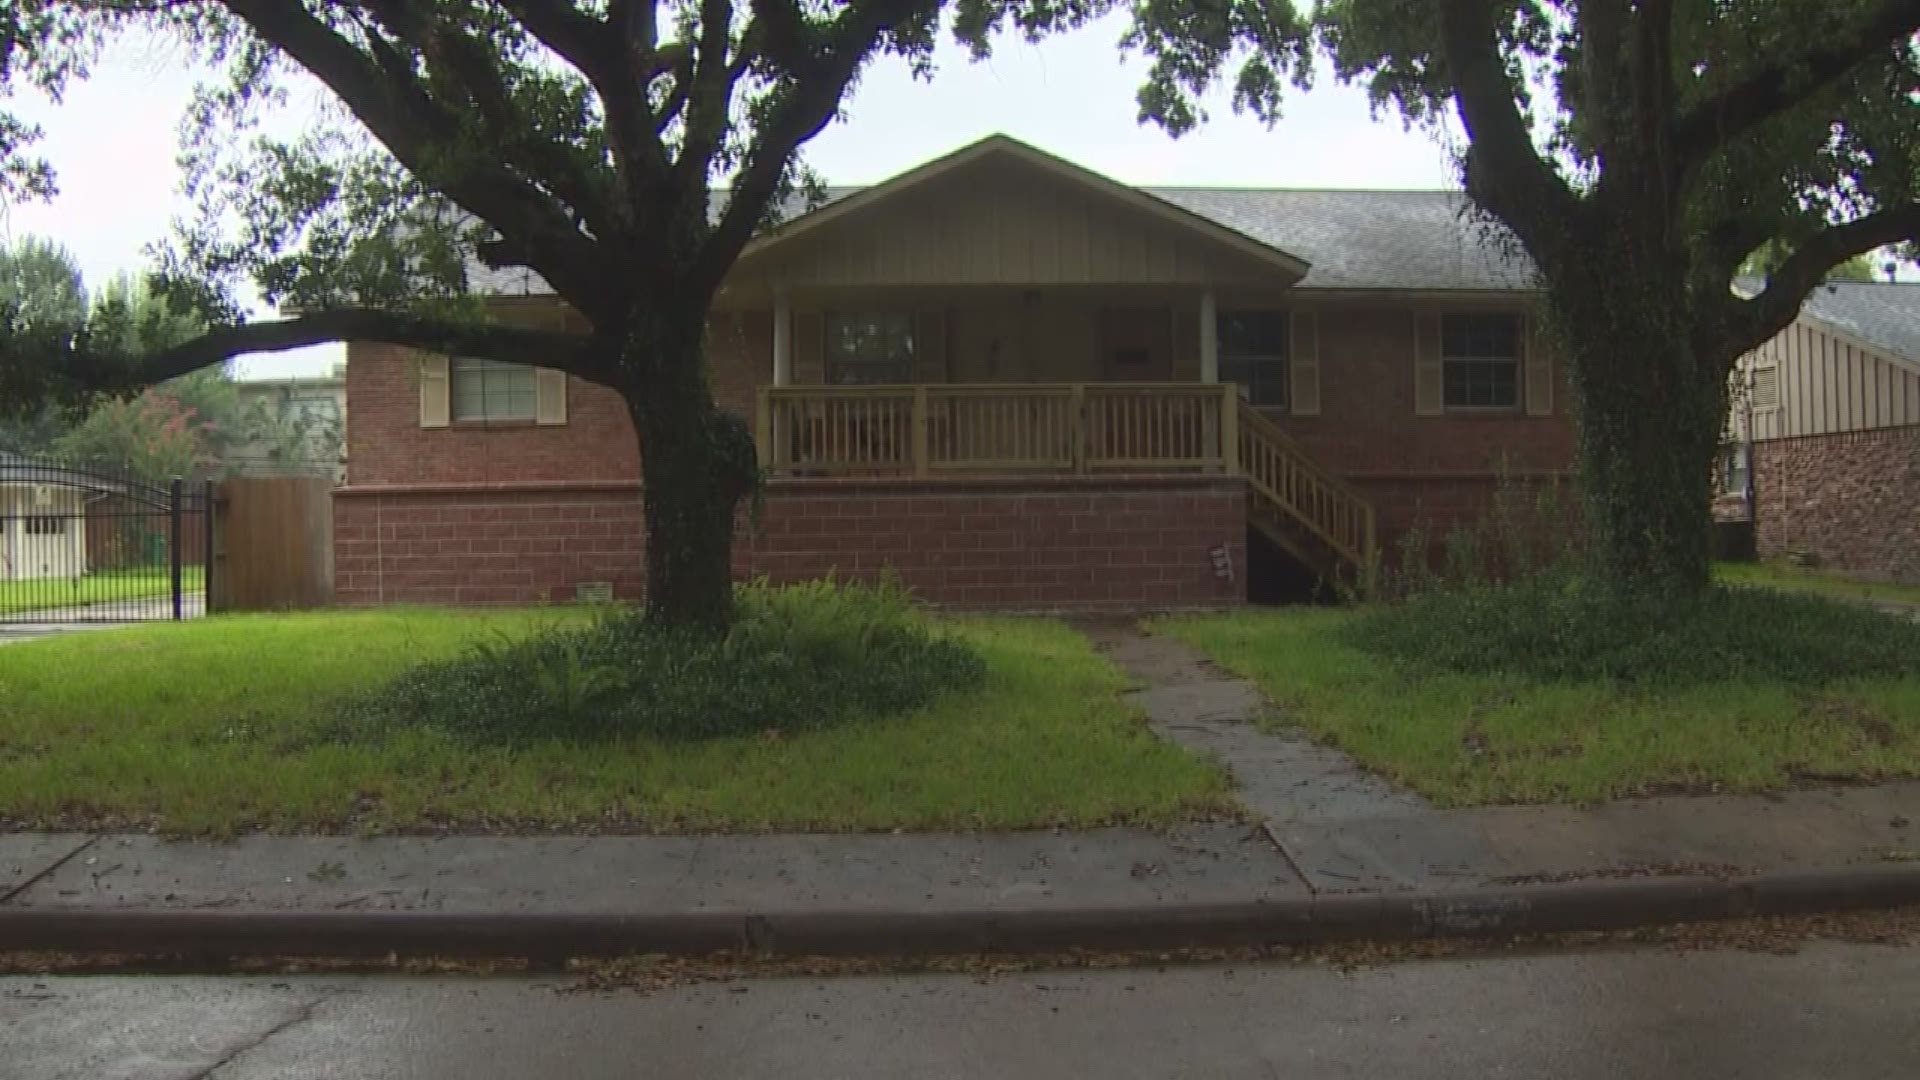 Meyerland residents are bracing for Tropical Storm Imelda's flooding threat. The threat is triggering some awful memories for people who flooded during Harvey.